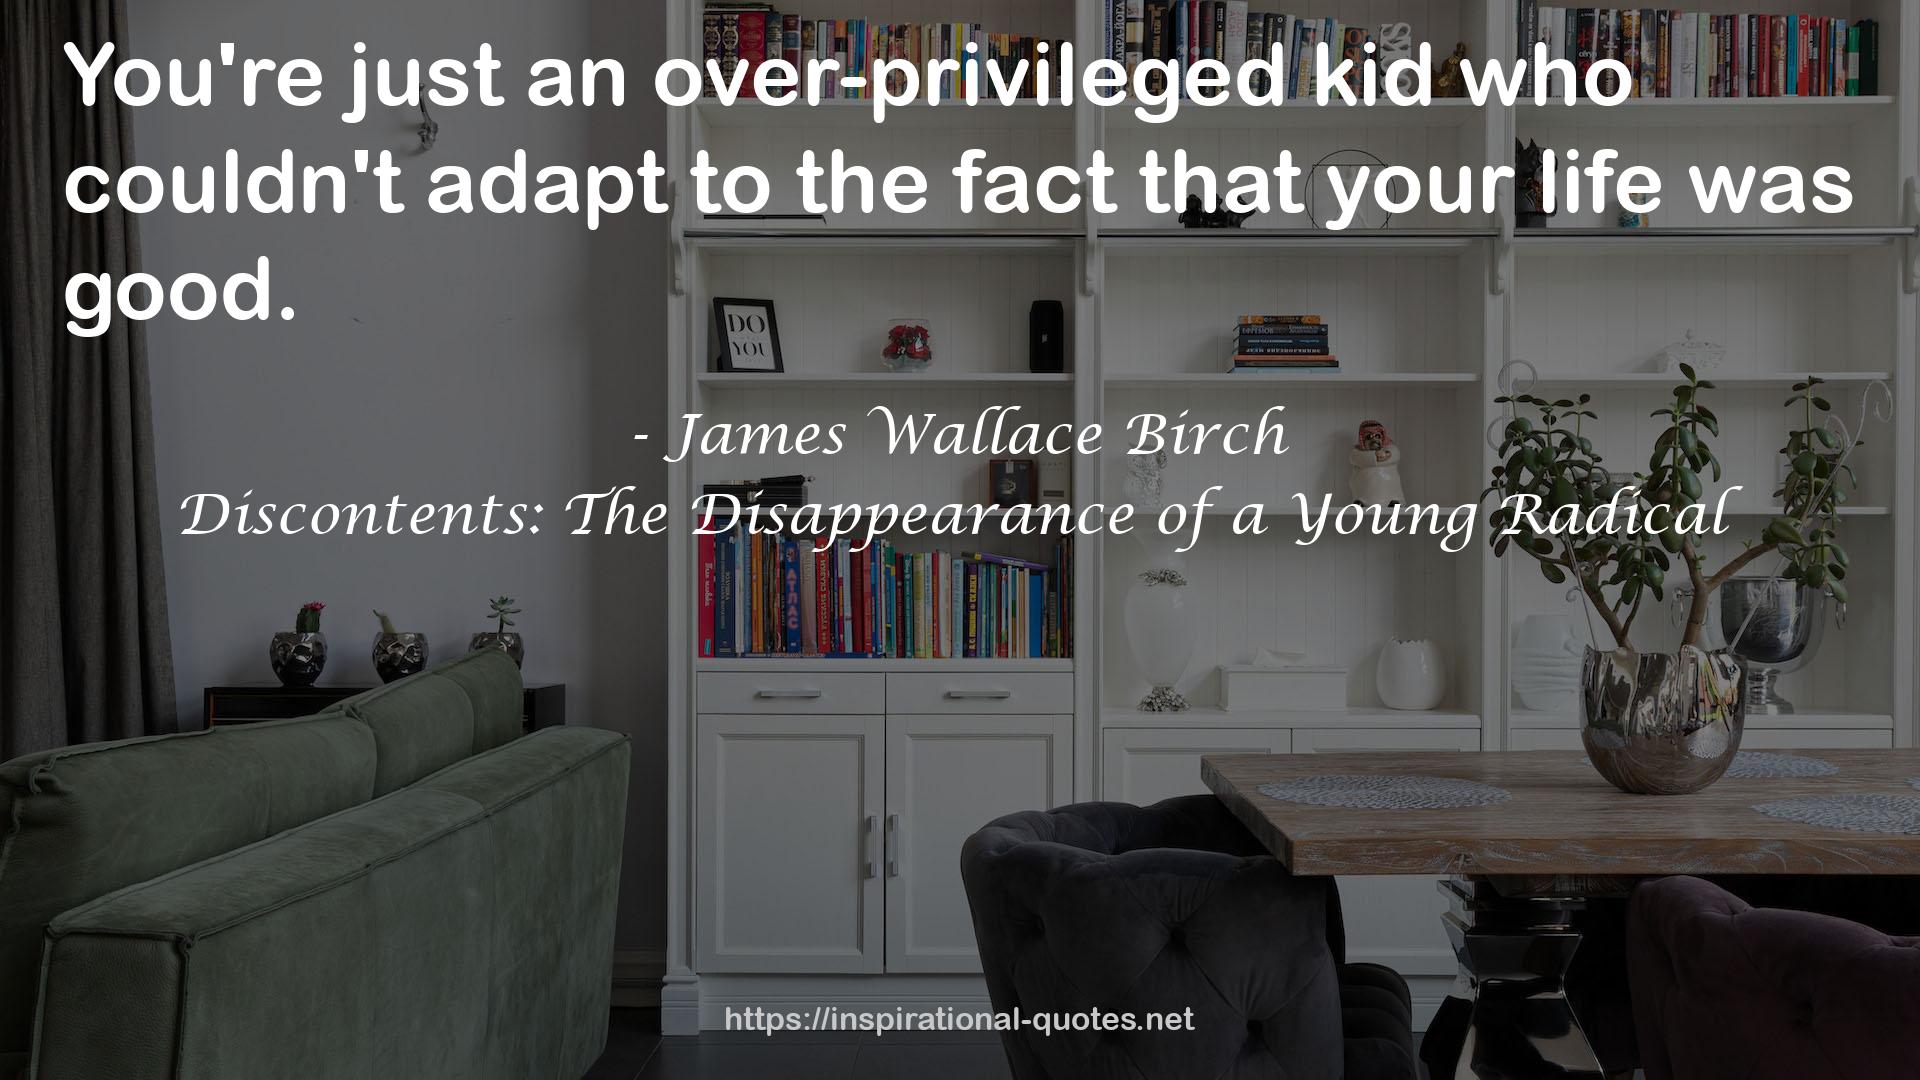 James Wallace Birch QUOTES